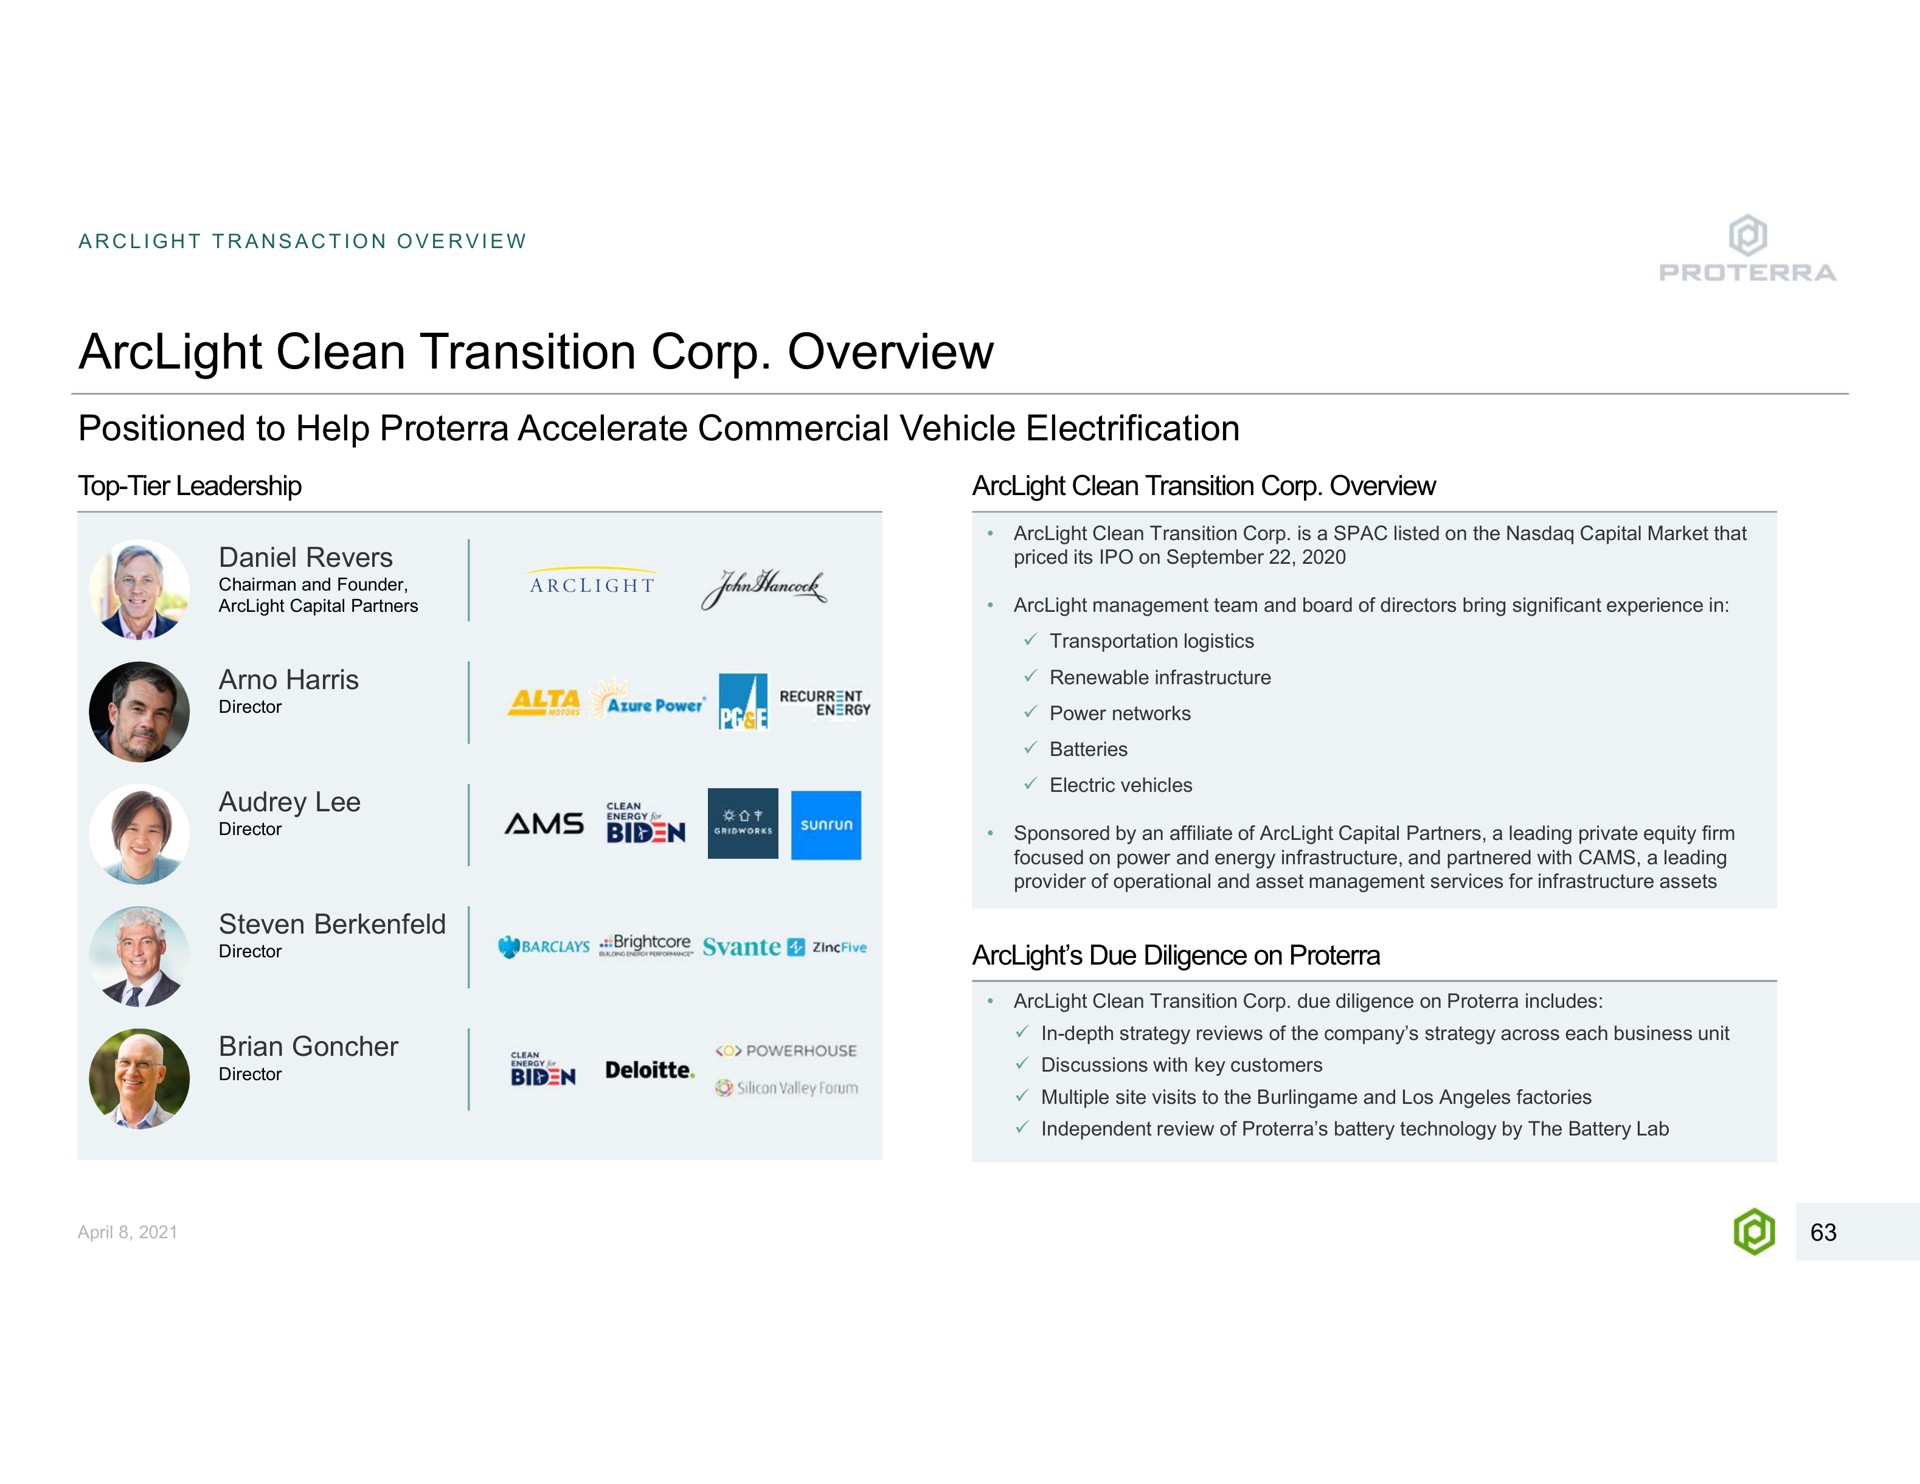 clean transition corp overview transaction positioned to help accelerate commercial vehicle electrification top tier leadership is a listed on the capital market that priced its on management team and board of directors bring significant experience in revers chairman and founder capital partners director azure power recurrent a lee director ams bid transportation logistics renewable infrastructure power networks batteries electric vehicles sponsored by an affiliate of capital partners a leading private equity firm focused on power and energy infrastructure and partnered with cams a leading provider of operational and asset management services for infrastructure assets steven director due diligence on director energy for bib powerhouse silicon valley due diligence on includes in depth strategy reviews of the company strategy across each business unit discussions with key customers multiple site visits to the and factories independent review of battery technology by the battery lab | Proterra